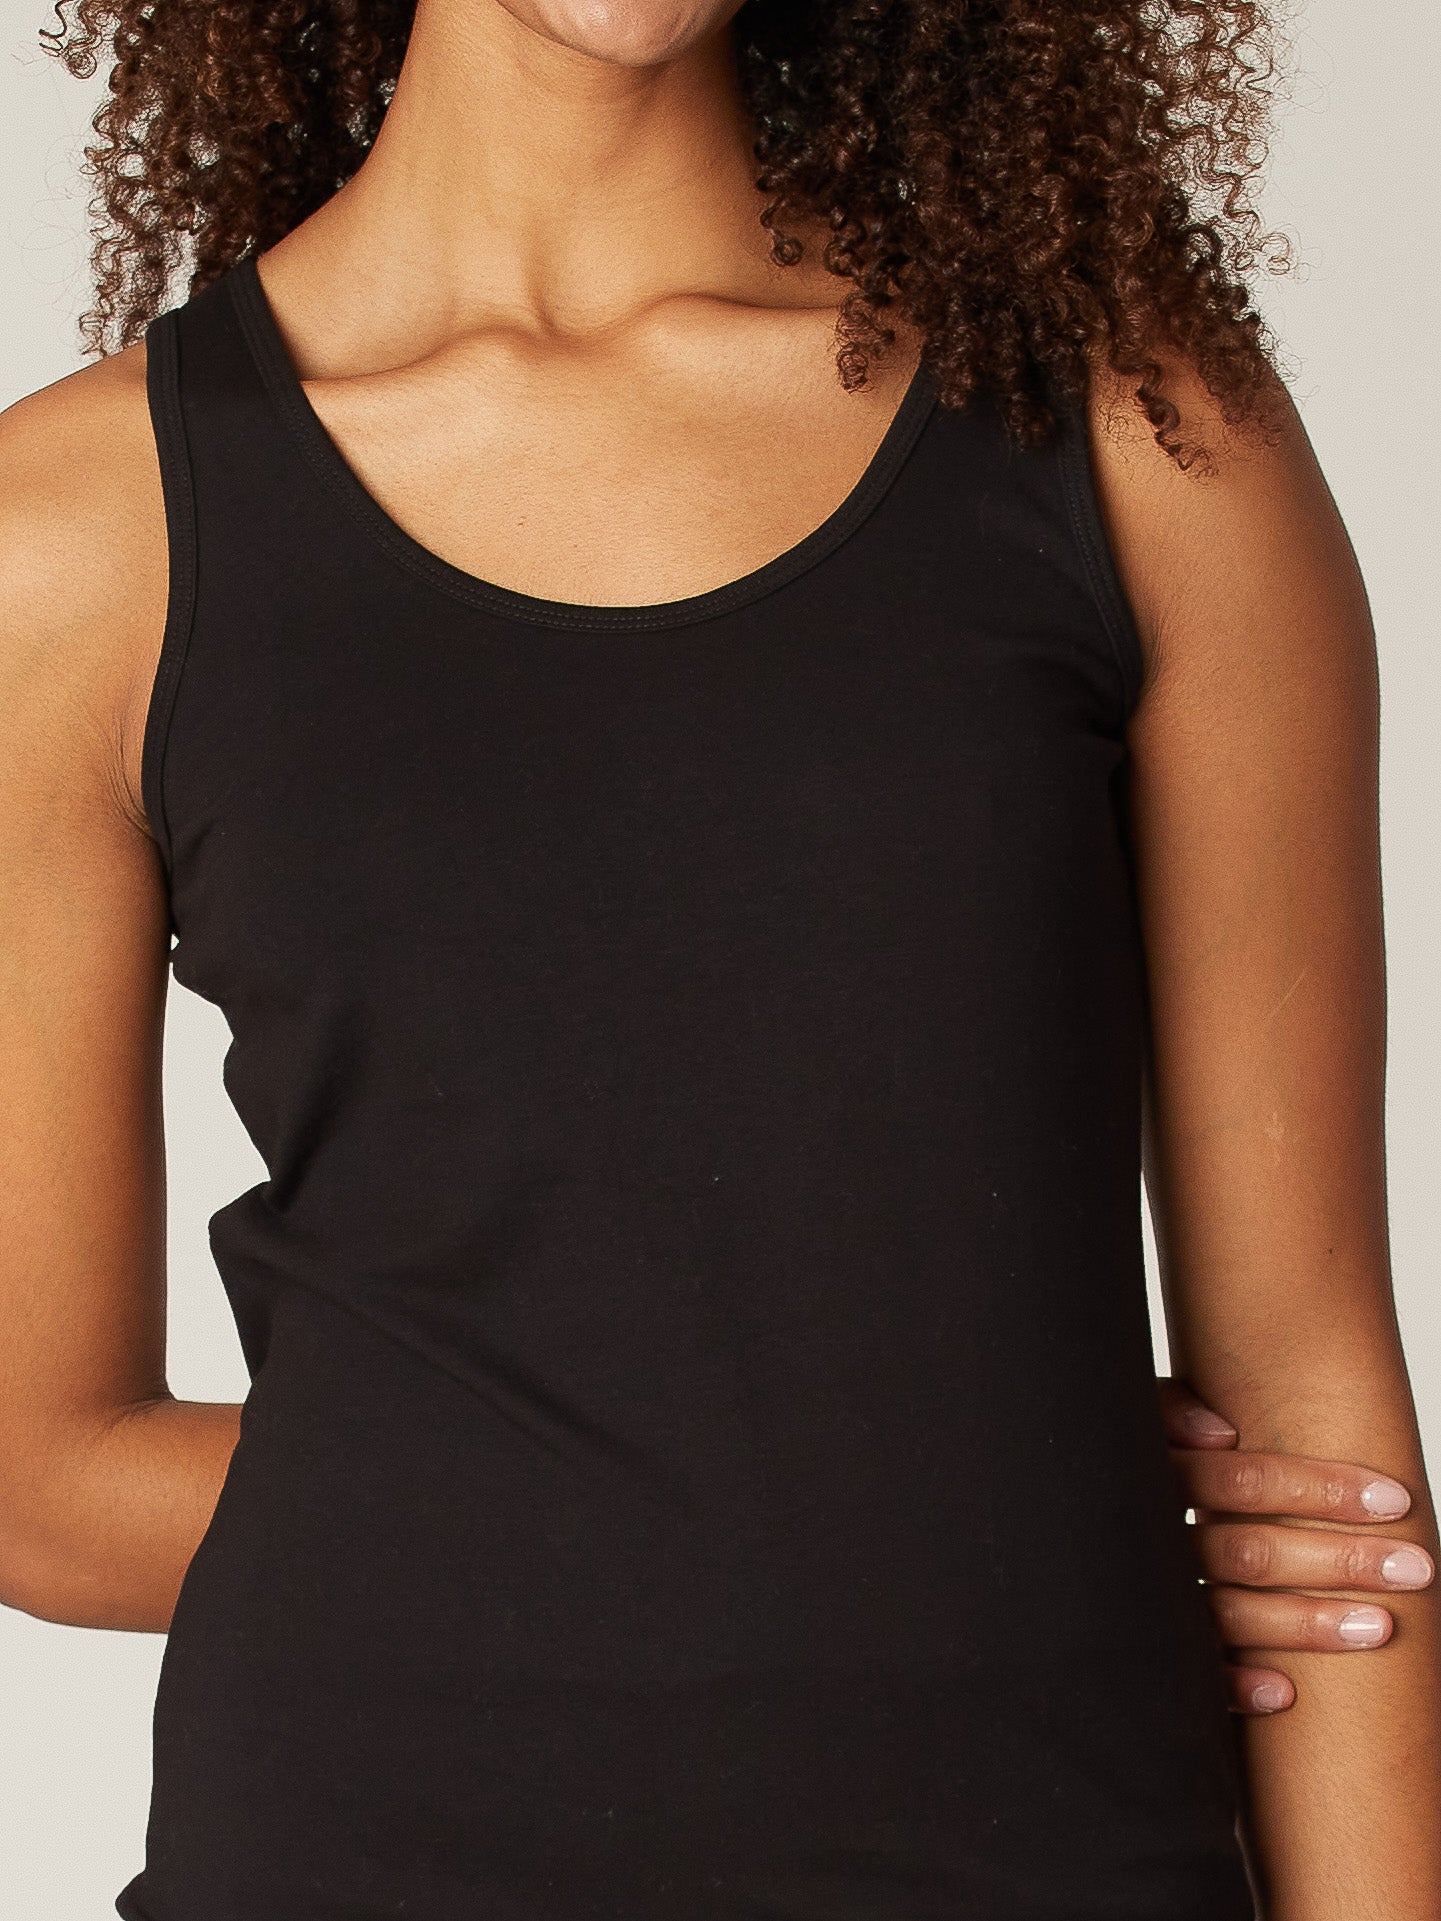 Fitted reversible tank top